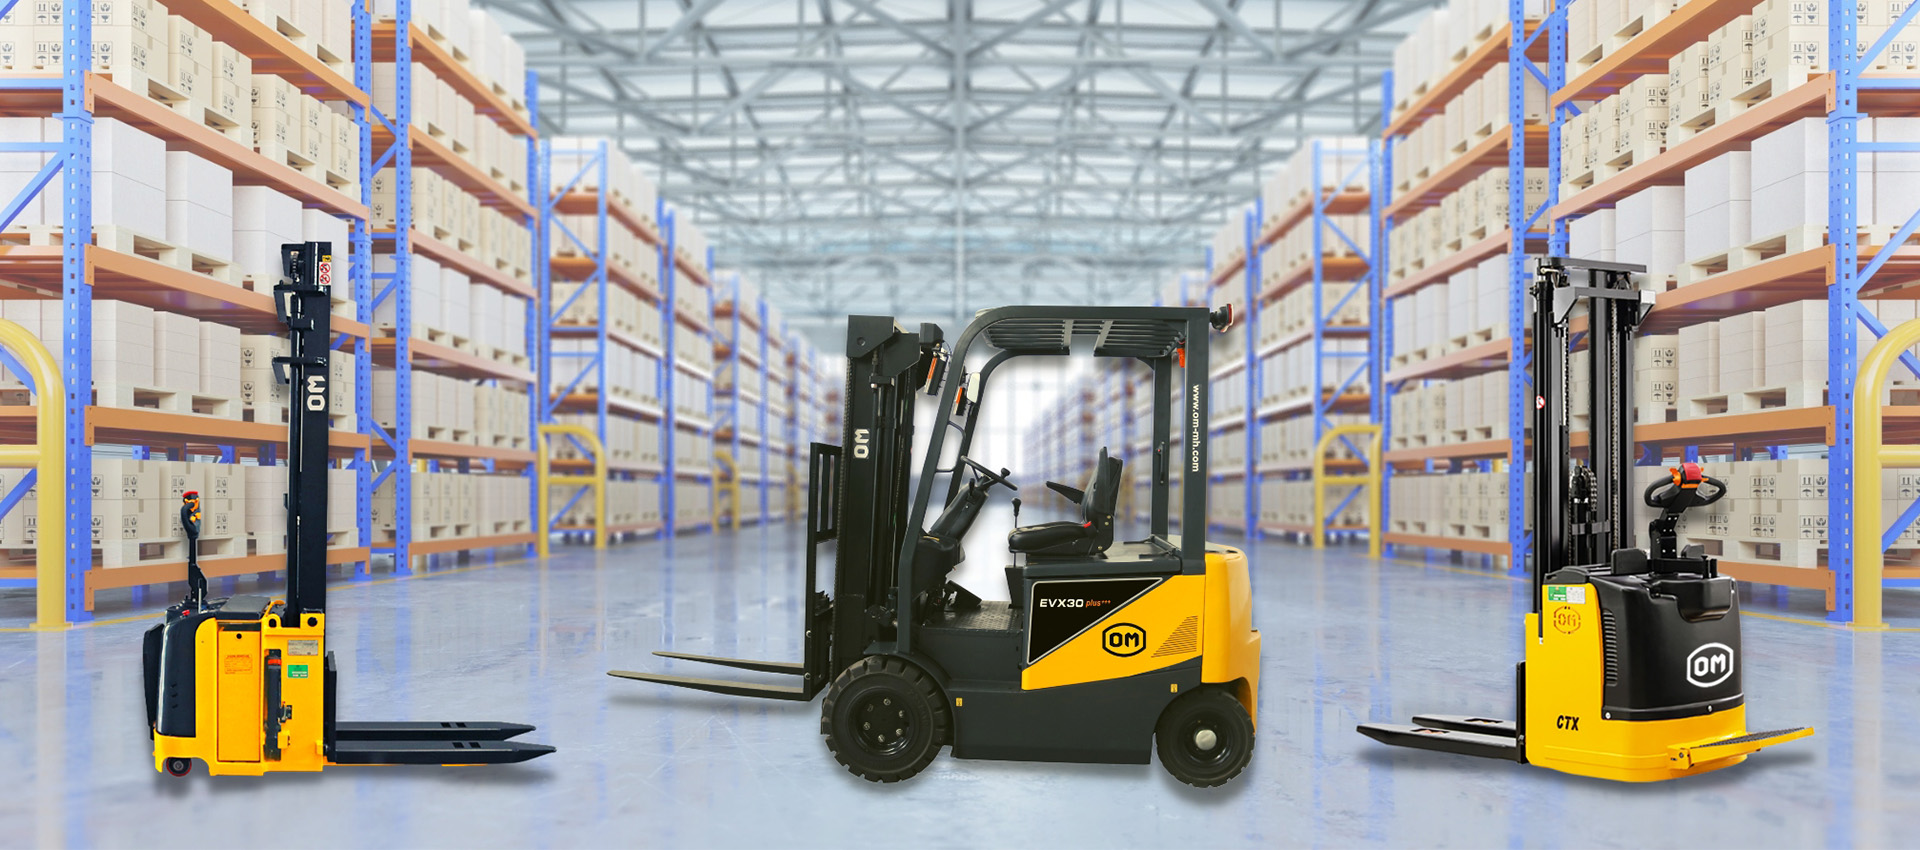 Forklift, Reach truck and Stacker- Tips to select the right equipment for your warehouse